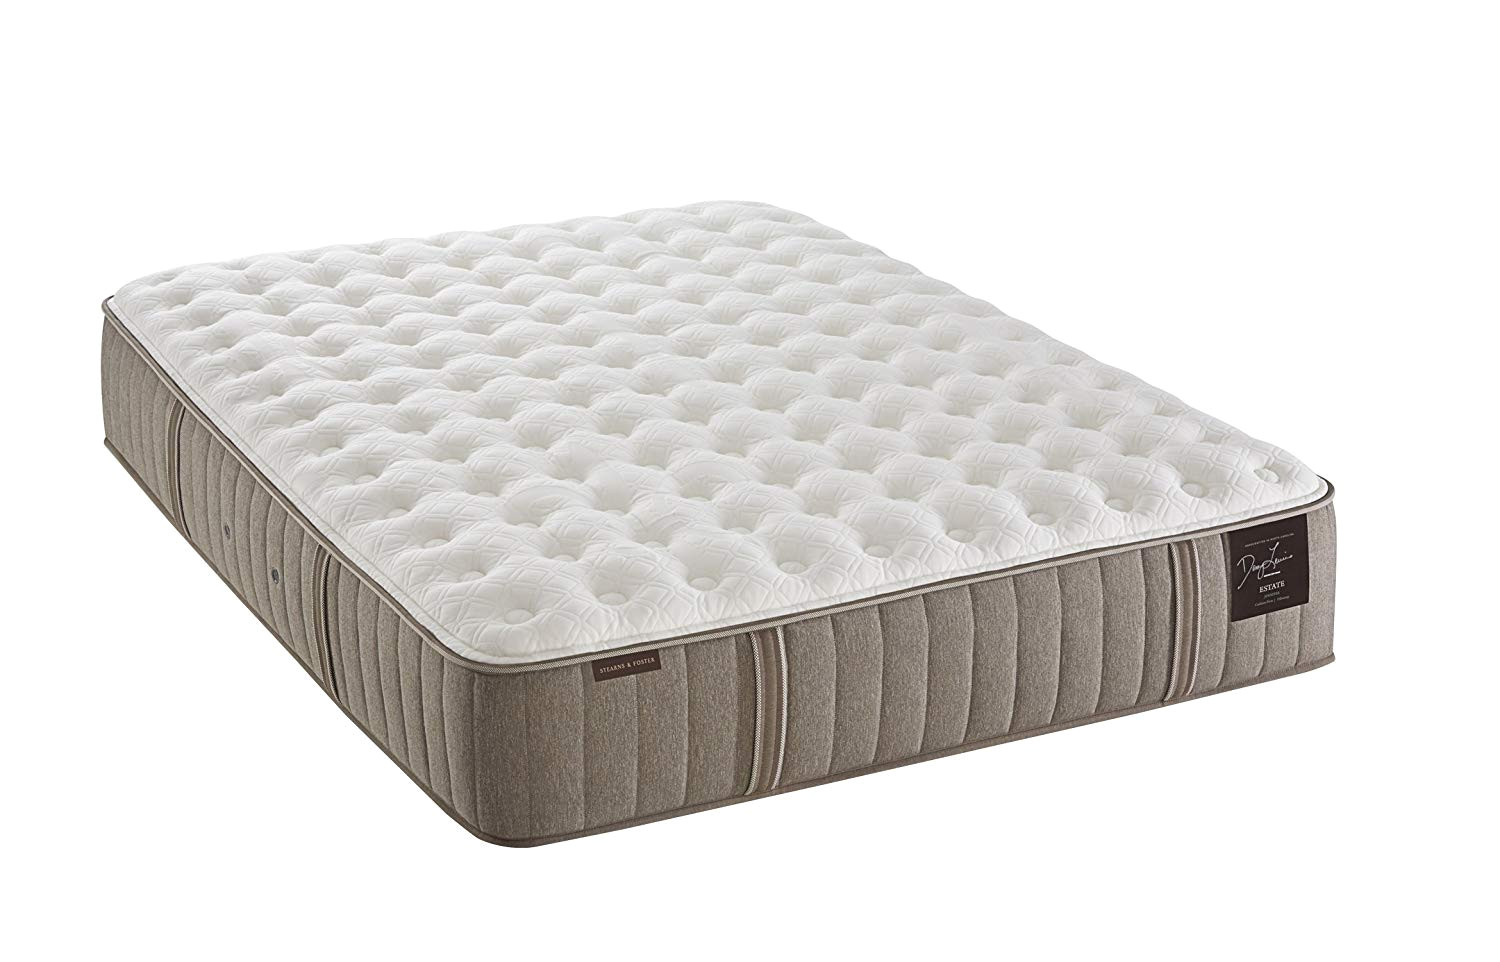 amazon com stearns and foster estate oak terrace 14 inch luxury firm tight top mattress queen kitchen dining